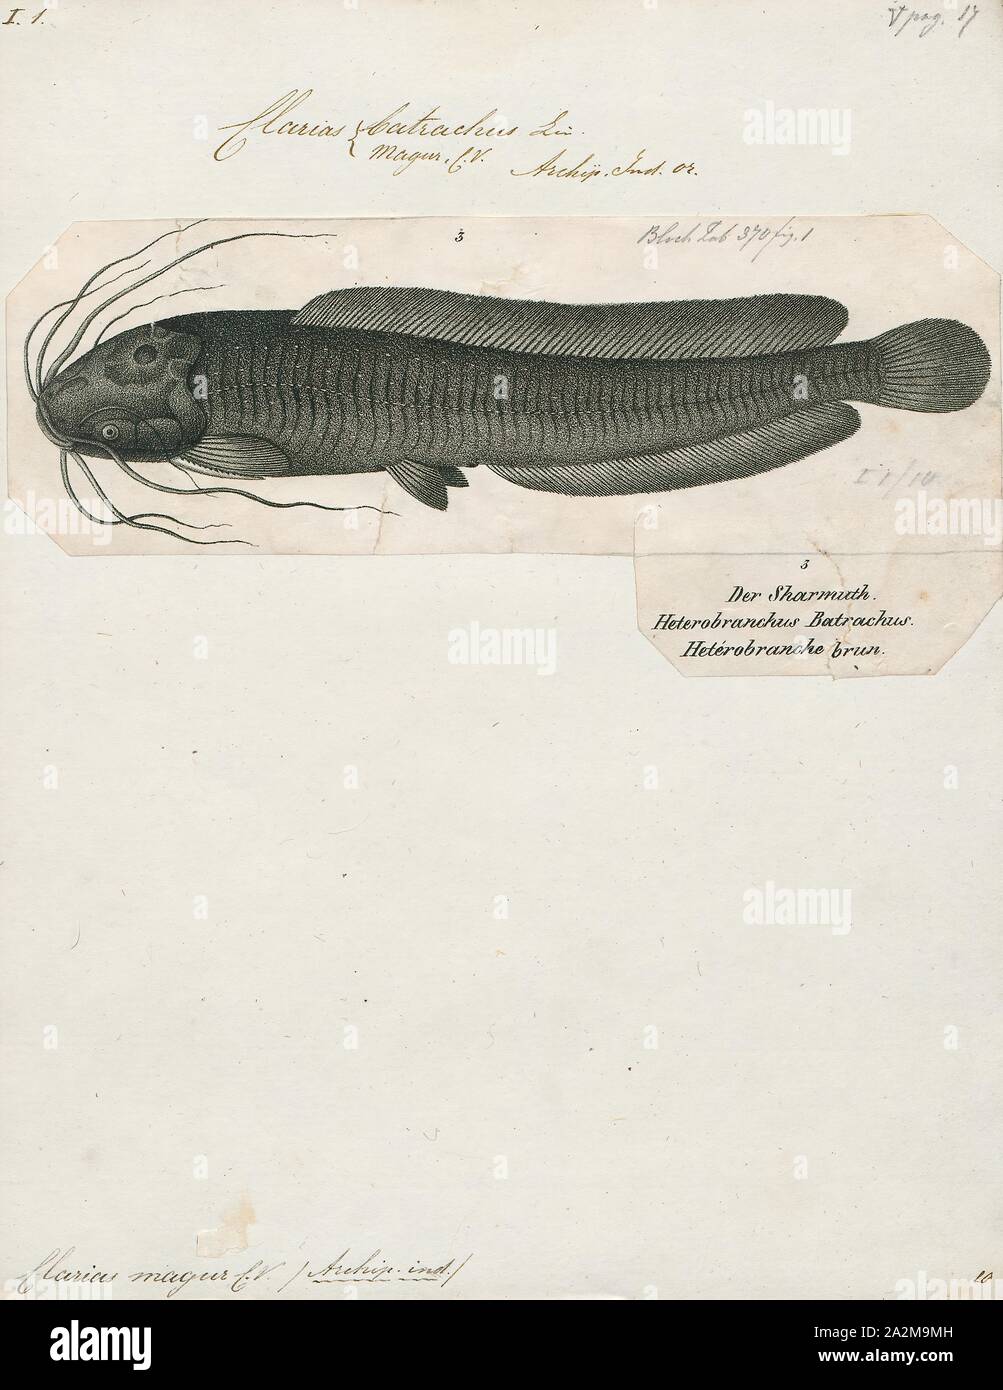 Clarias magur, Print, Clarias is a genus of catfishes (order Siluriformes) of the family Clariidae, the airbreathing catfishes. The name is derived from the Greek chlaros, which means lively, in reference to the ability of the fish to live for a long time out of water., 1700-1880 Stock Photo